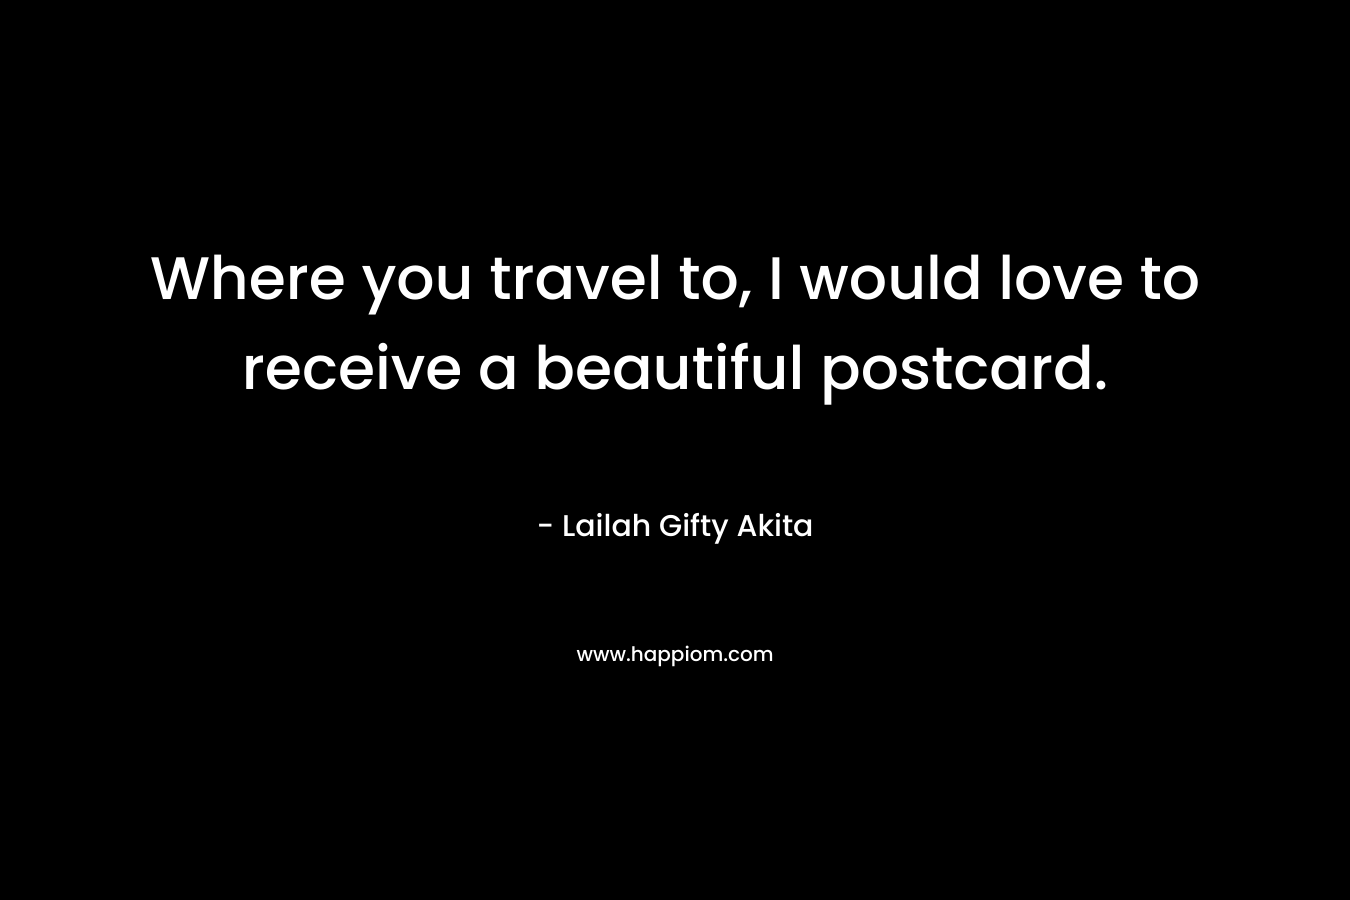 Where you travel to, I would love to receive a beautiful postcard. – Lailah Gifty Akita